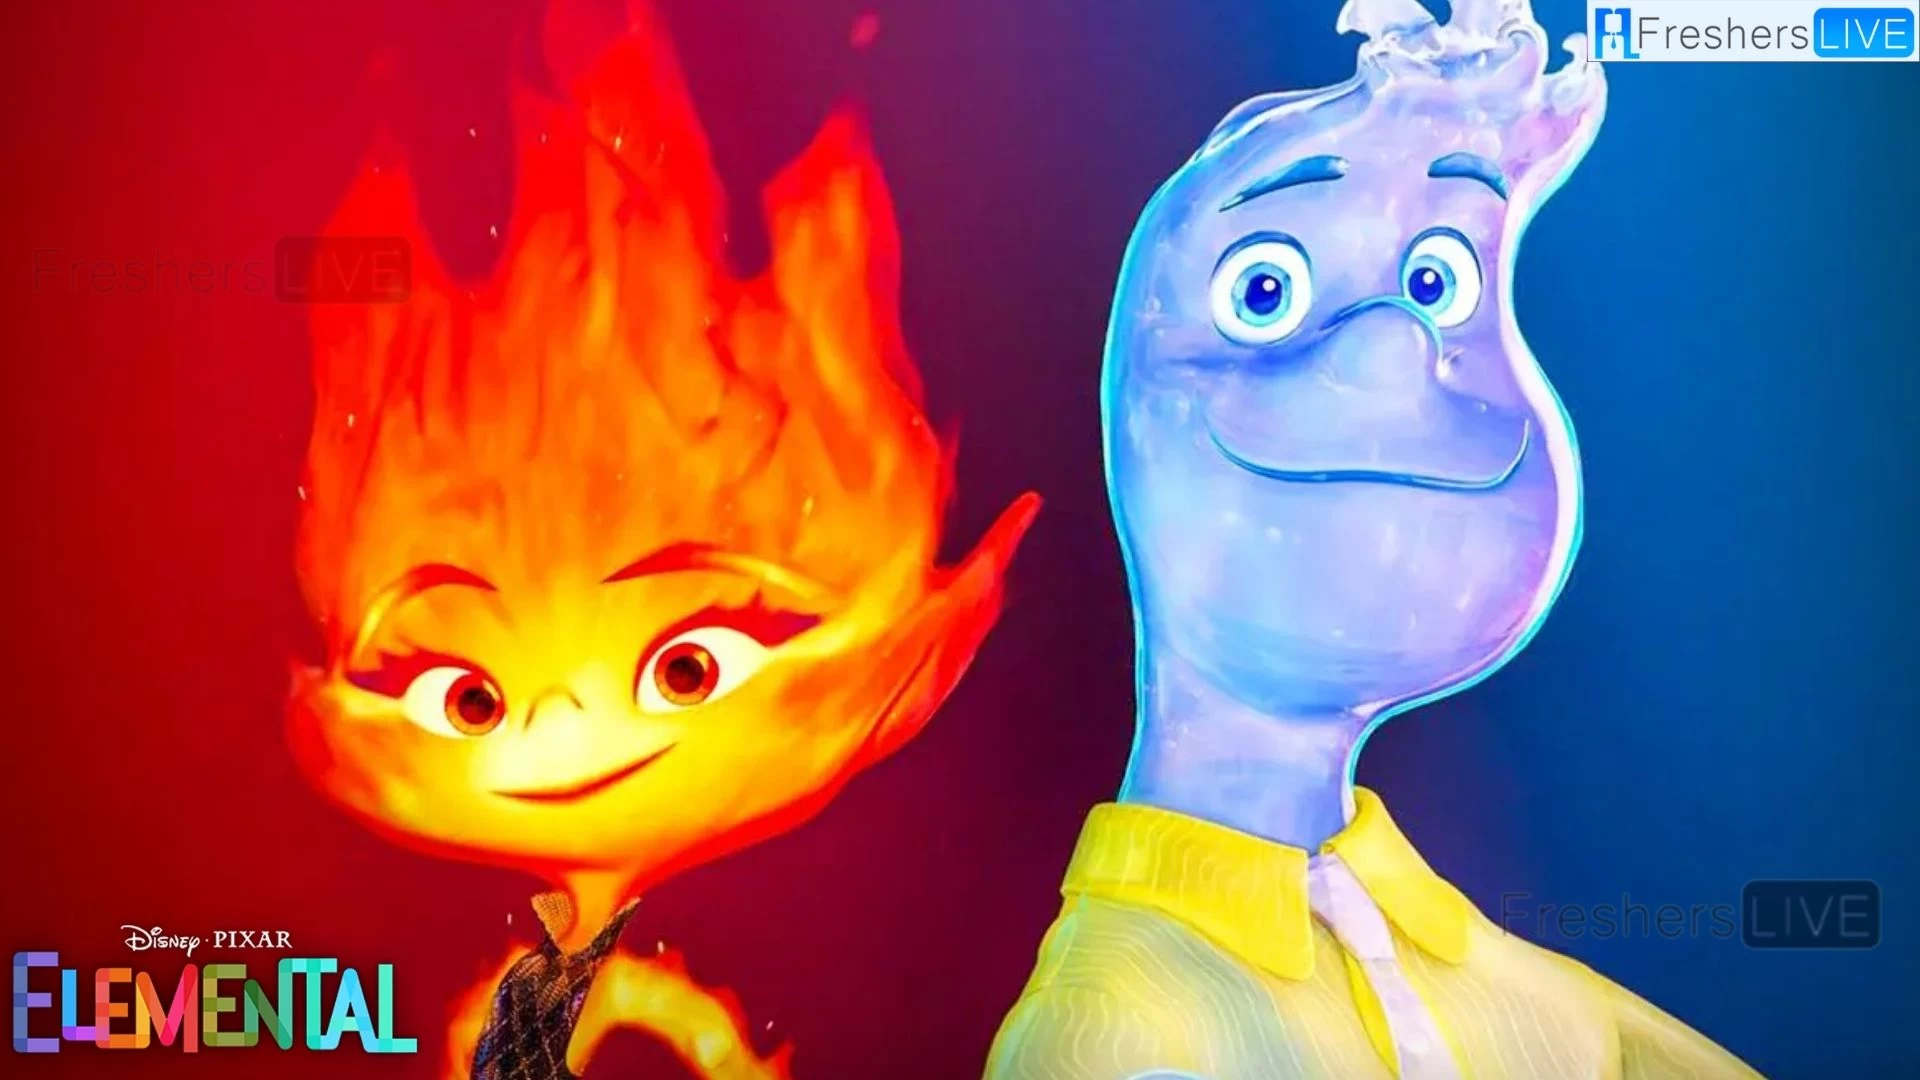 Will There Be an Elemental 2? Is Elemental a Sequel to Inside Out? Elemental 2 Release Date